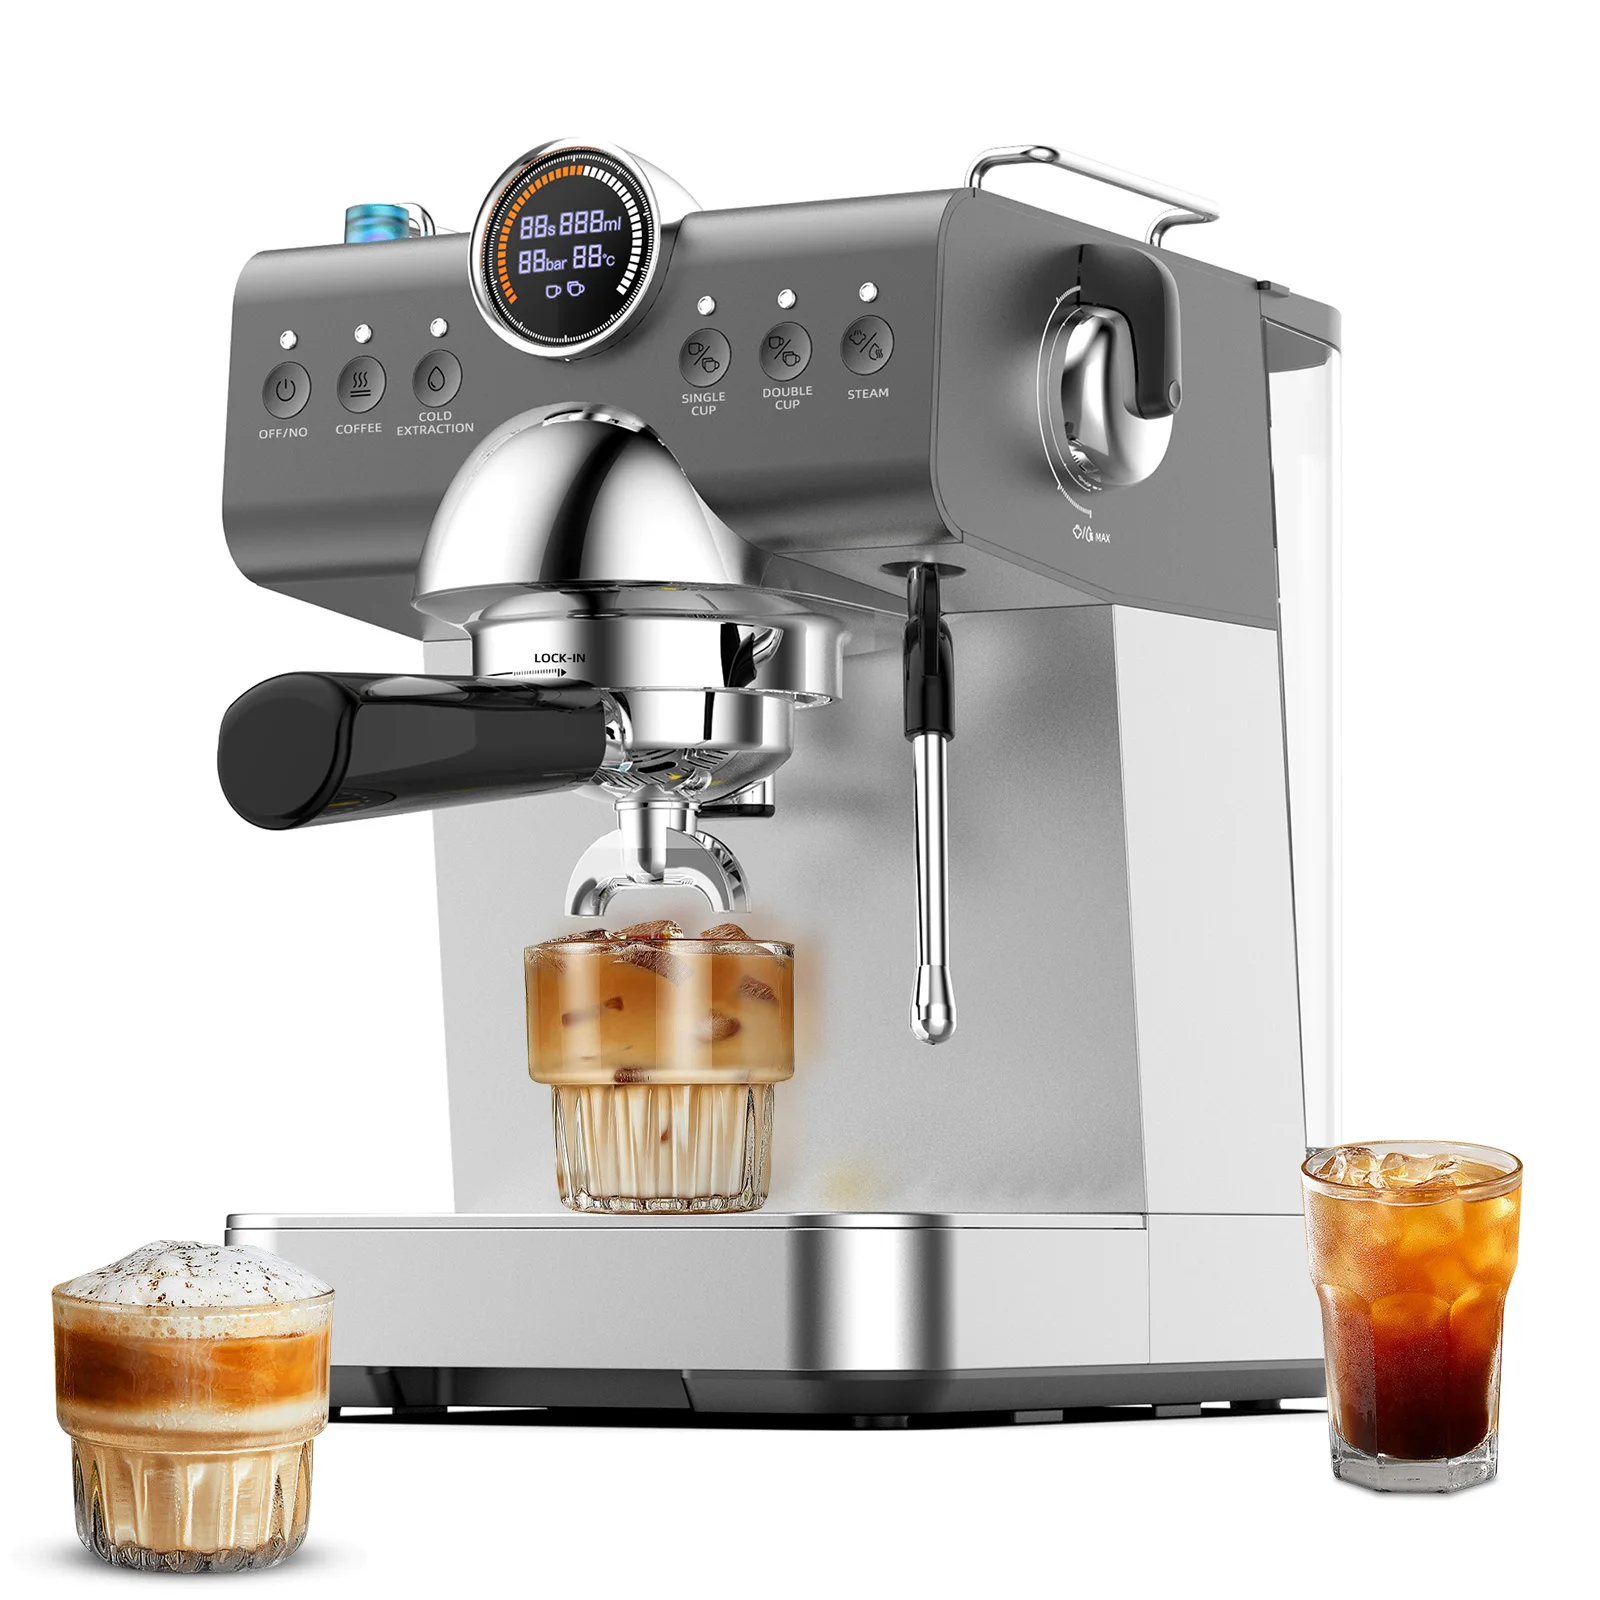 Mcilpoog Espresso Machine ，Compact Coffee Maker with Steam Milk Frother&Iced Coffee with LCD Display，Gift for Coffee Lover